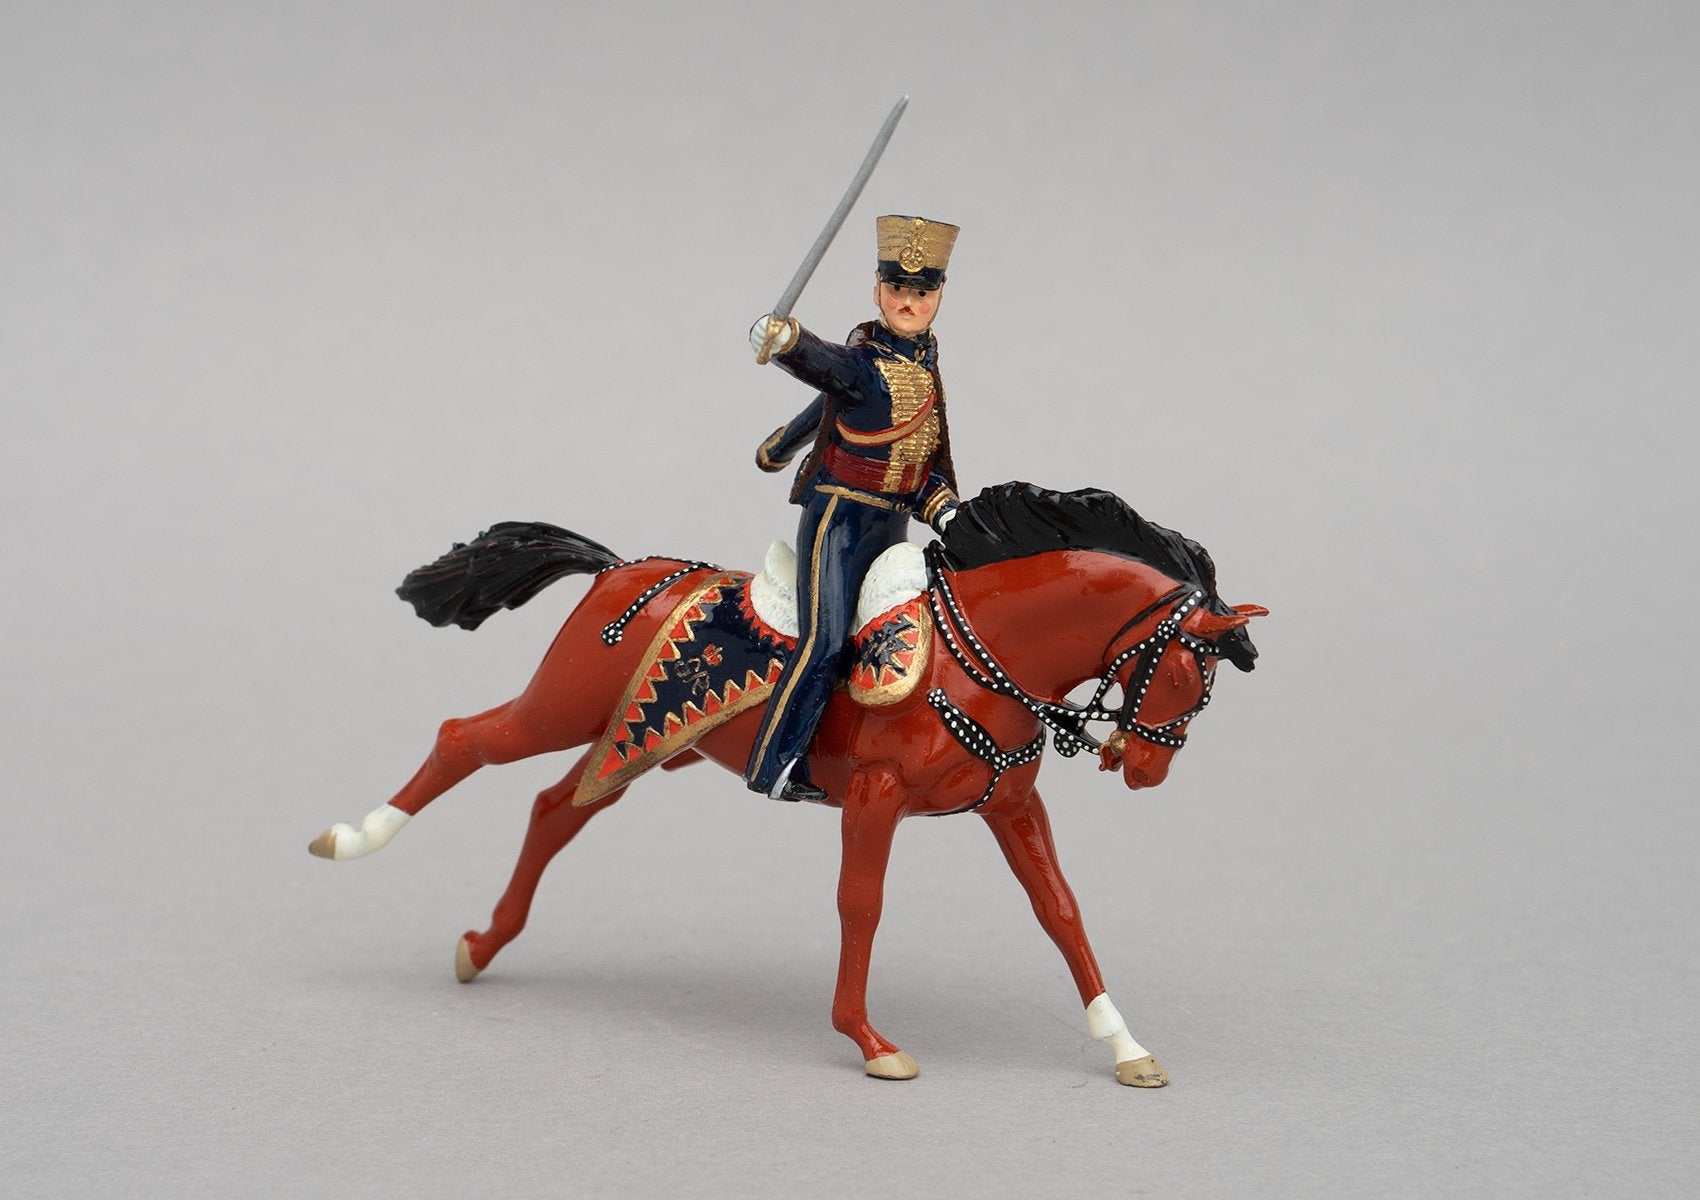 Set 114 Earl of Uxbridge, Waterloo, 1815 | British Cavalry | Napoleonic Wars | British commander of cavalry and artillery Napoleonic Wars, Waterloo.  Dressed in the uniform of the 7th Hussars. Single mounted officer with sabre on bay horse | Waterloo | © Imperial Productions | Sculpt by David Cowe